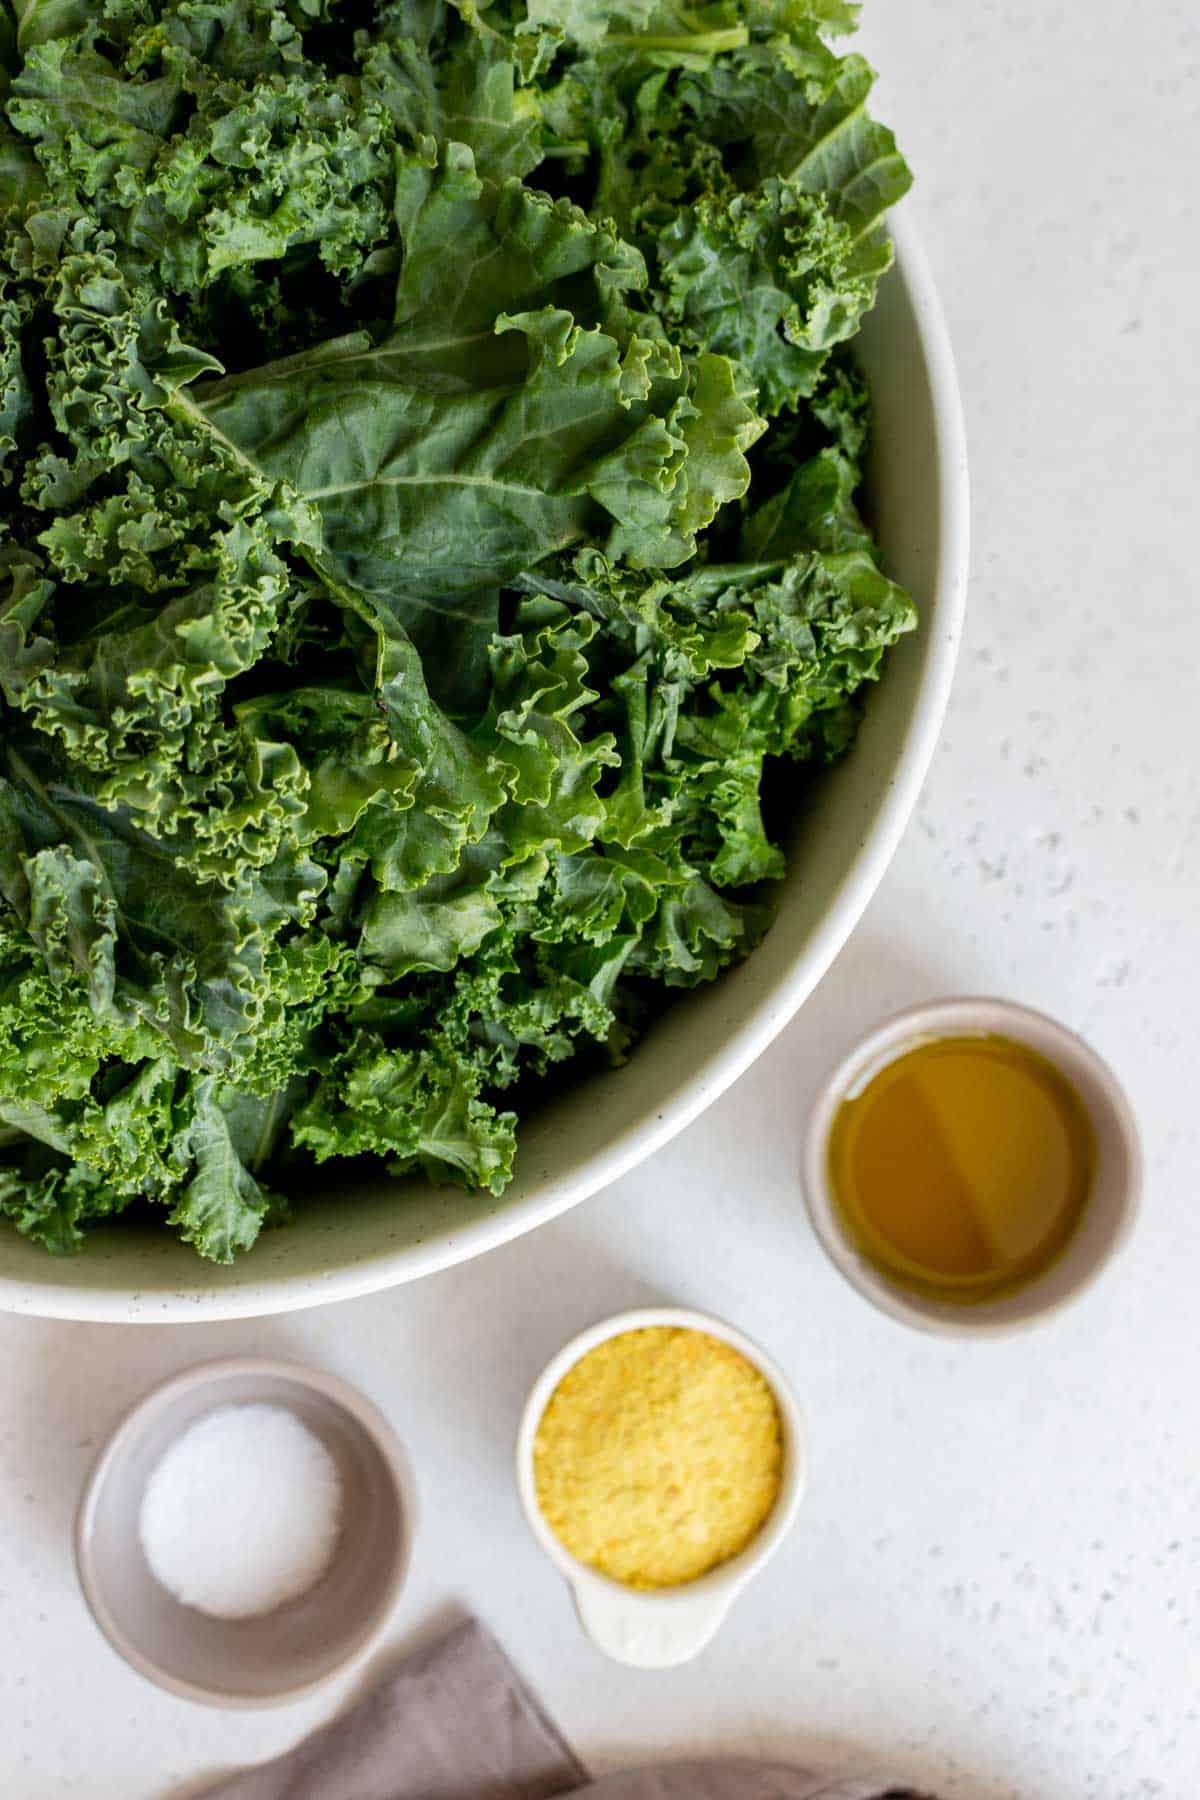 Ingredients needed to make kale chips with nutritional yeast.